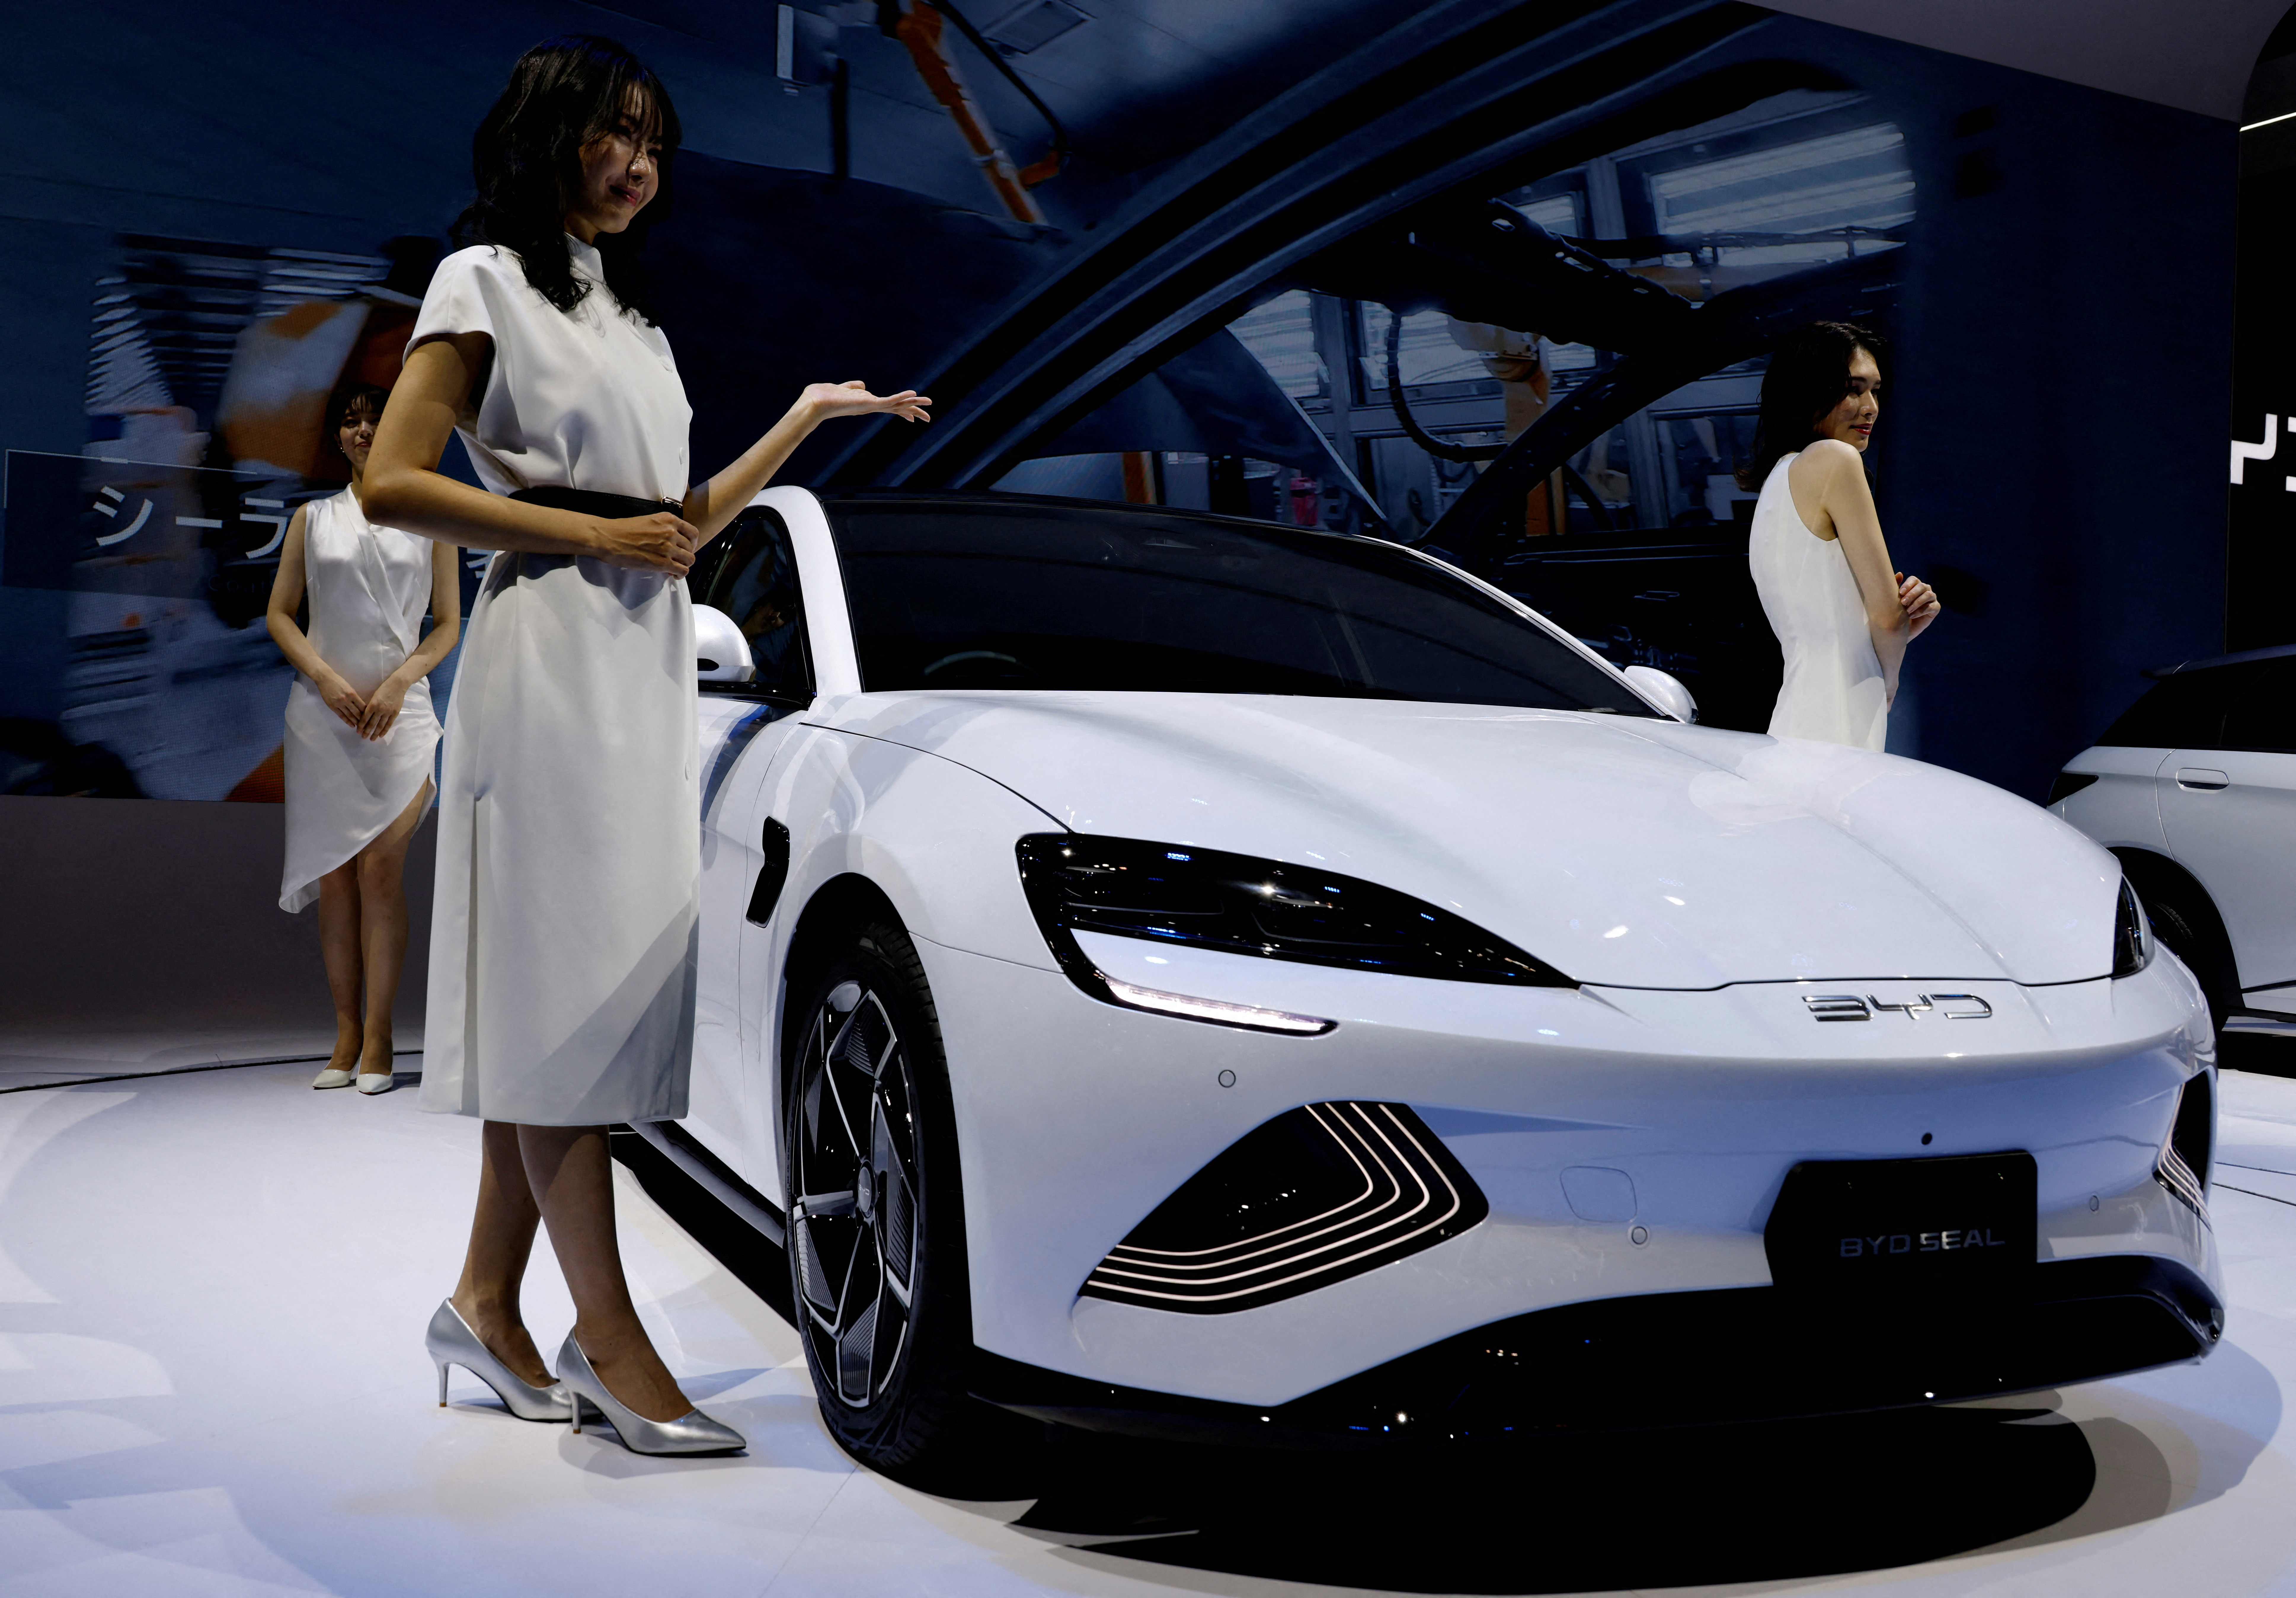 Models pose next to Chinese automobile manufacturer BYD's BYD SEAL during the Japan Mobility Show in Tokyo